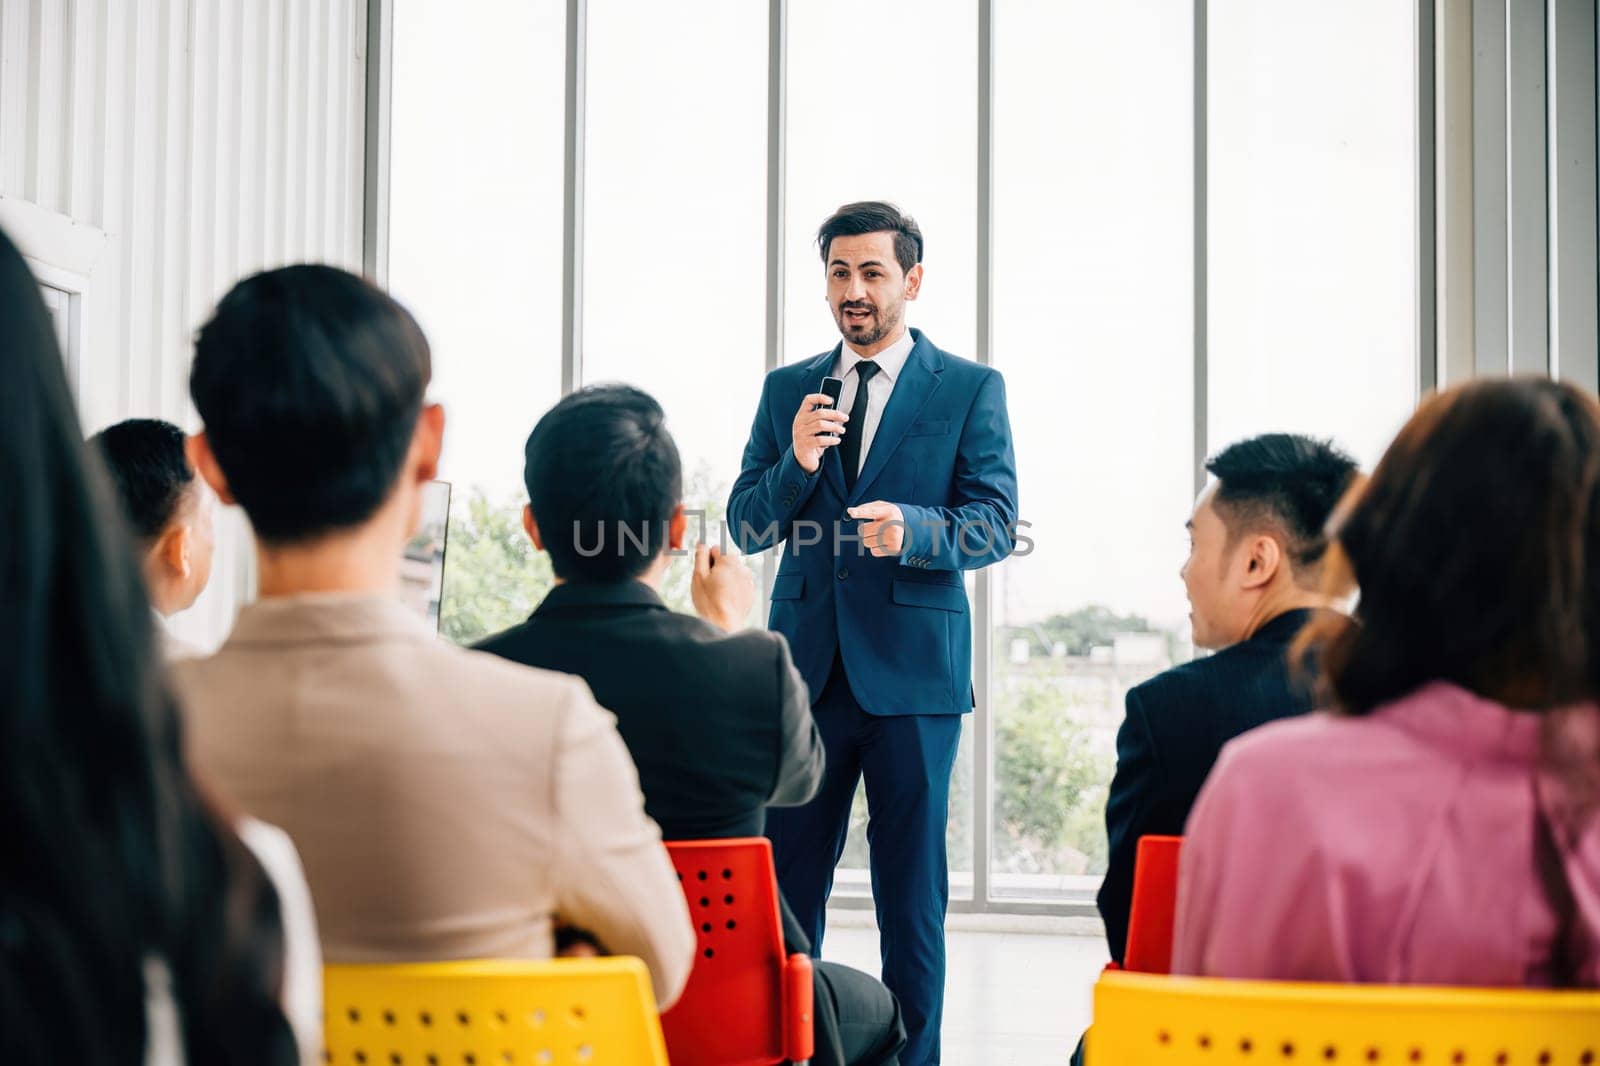 In a meeting room business professionals along with a diverse audience of colleagues sit and attentively listen as leaders present reviews. symbolizes importance of teamwork and collaborative success. by Sorapop